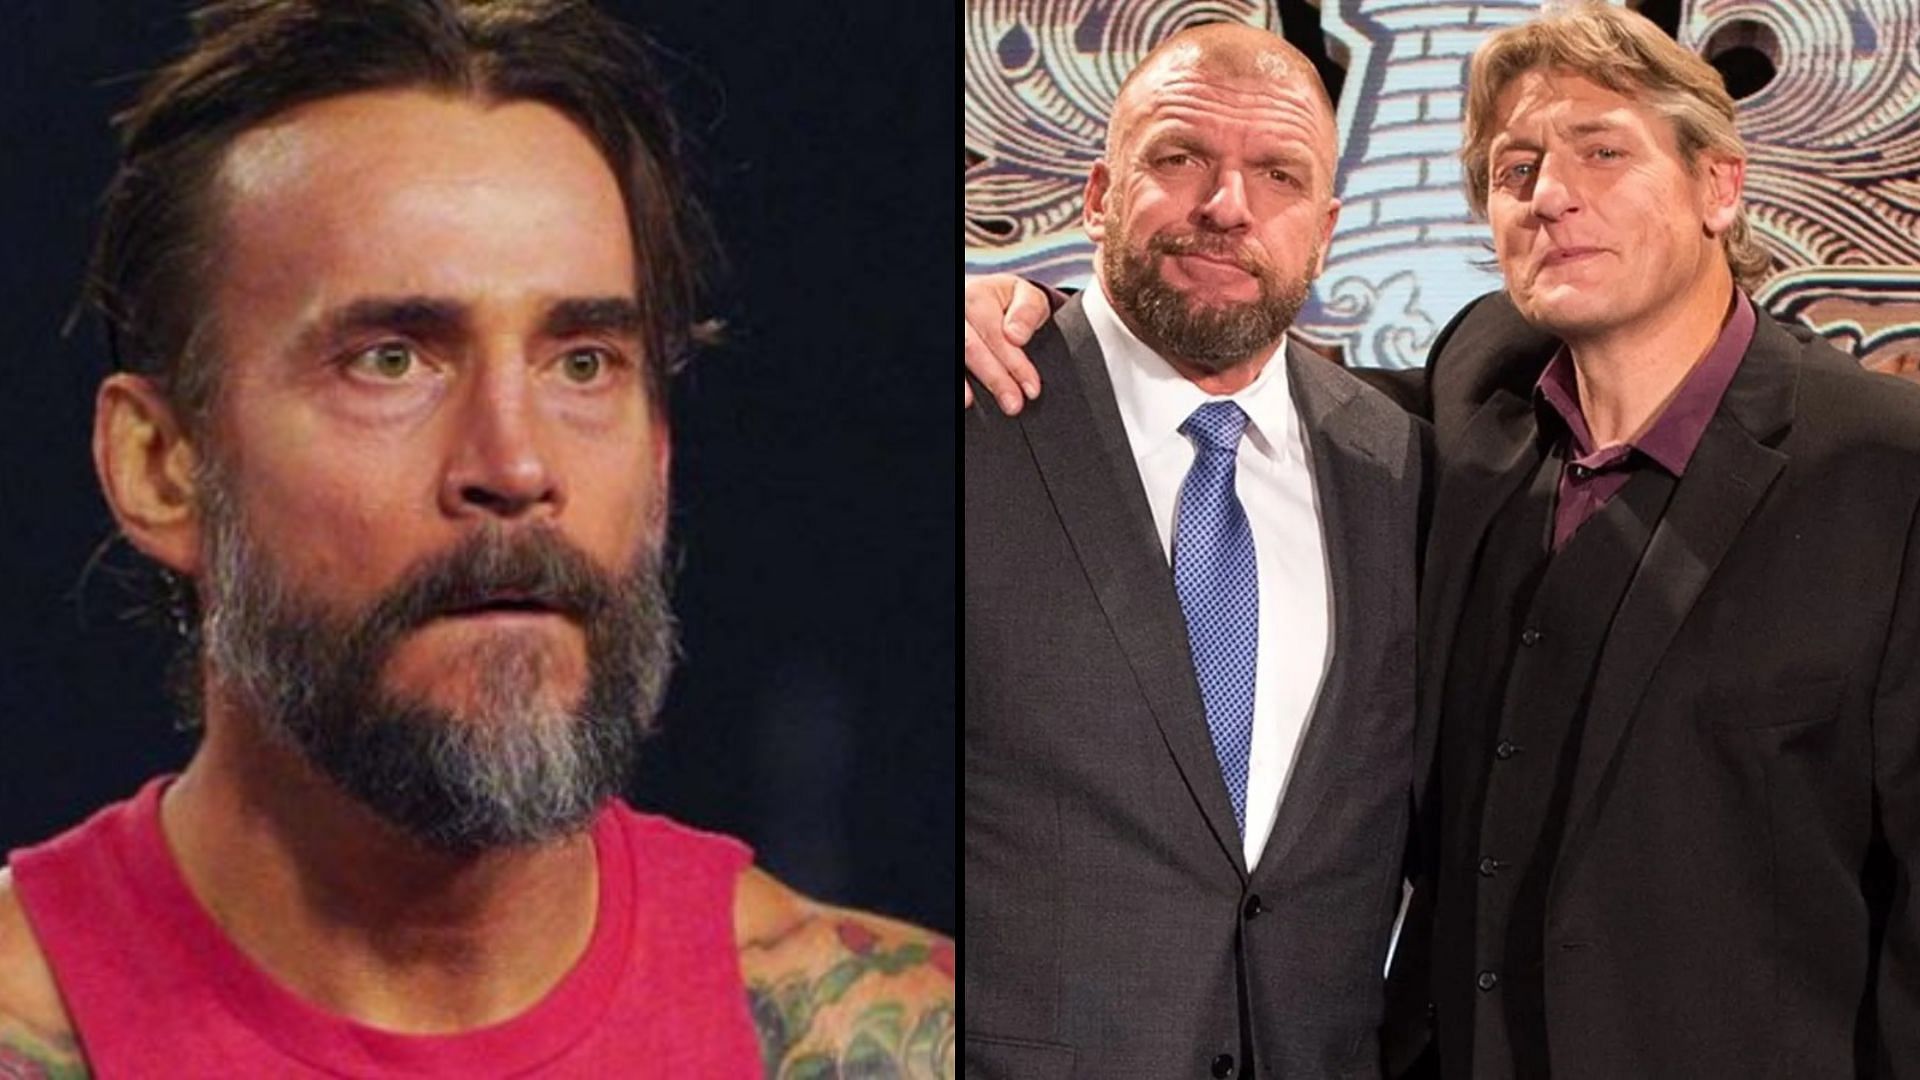 CM Punk and William Regal both worked with each other in WWE and AEW